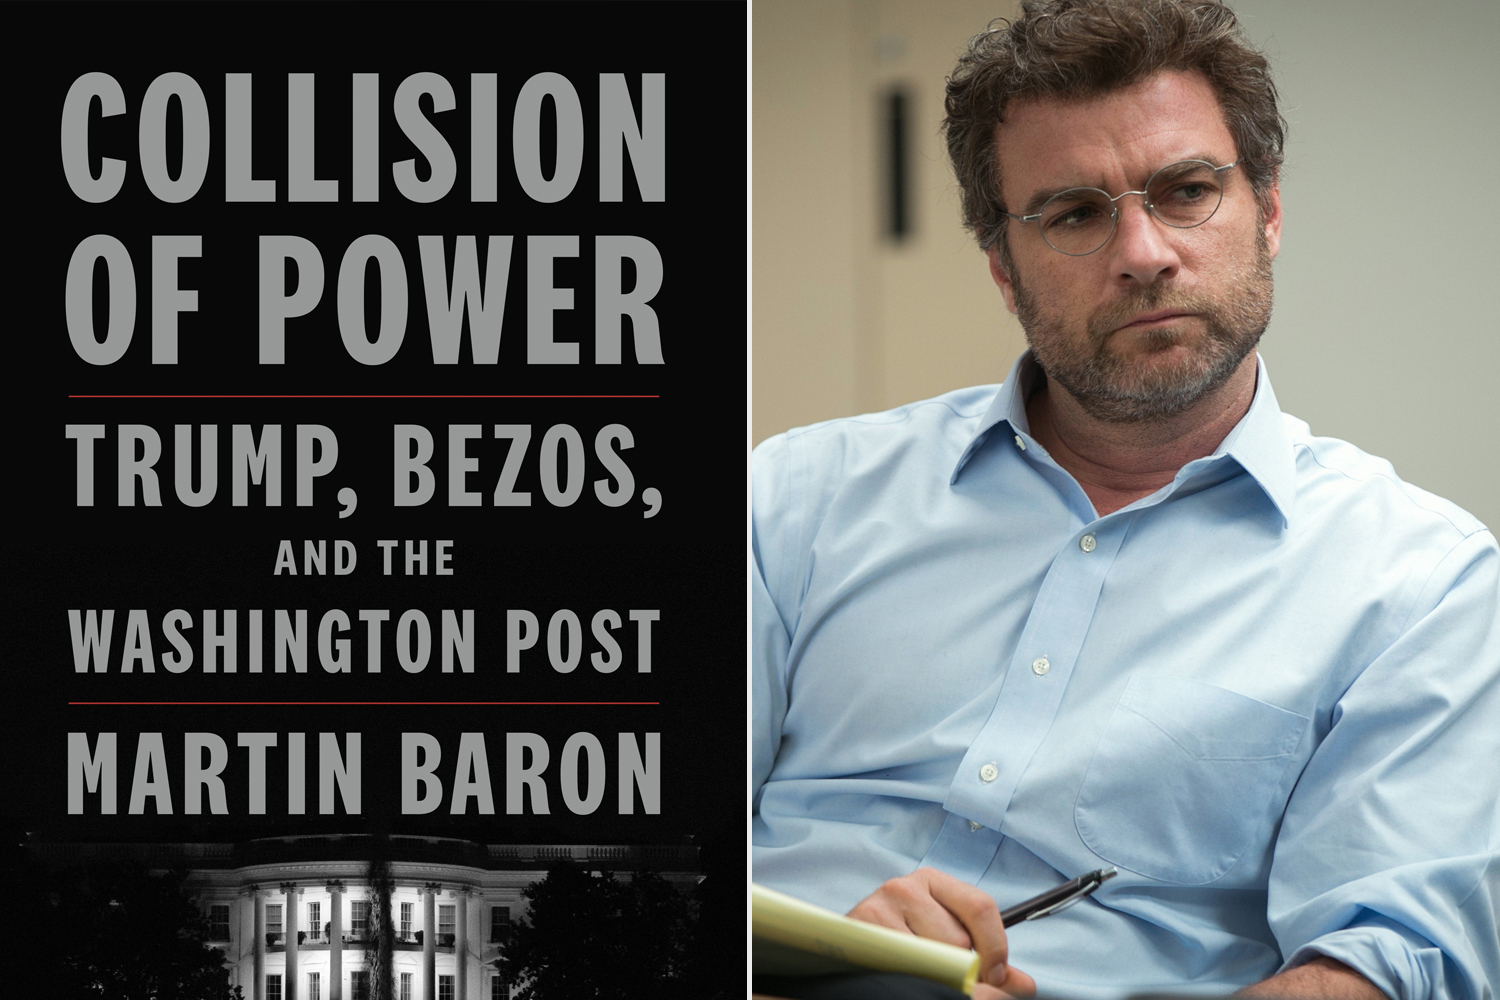 Liev Schreiber to narrate Marty Baron's 'Collision of Power' book